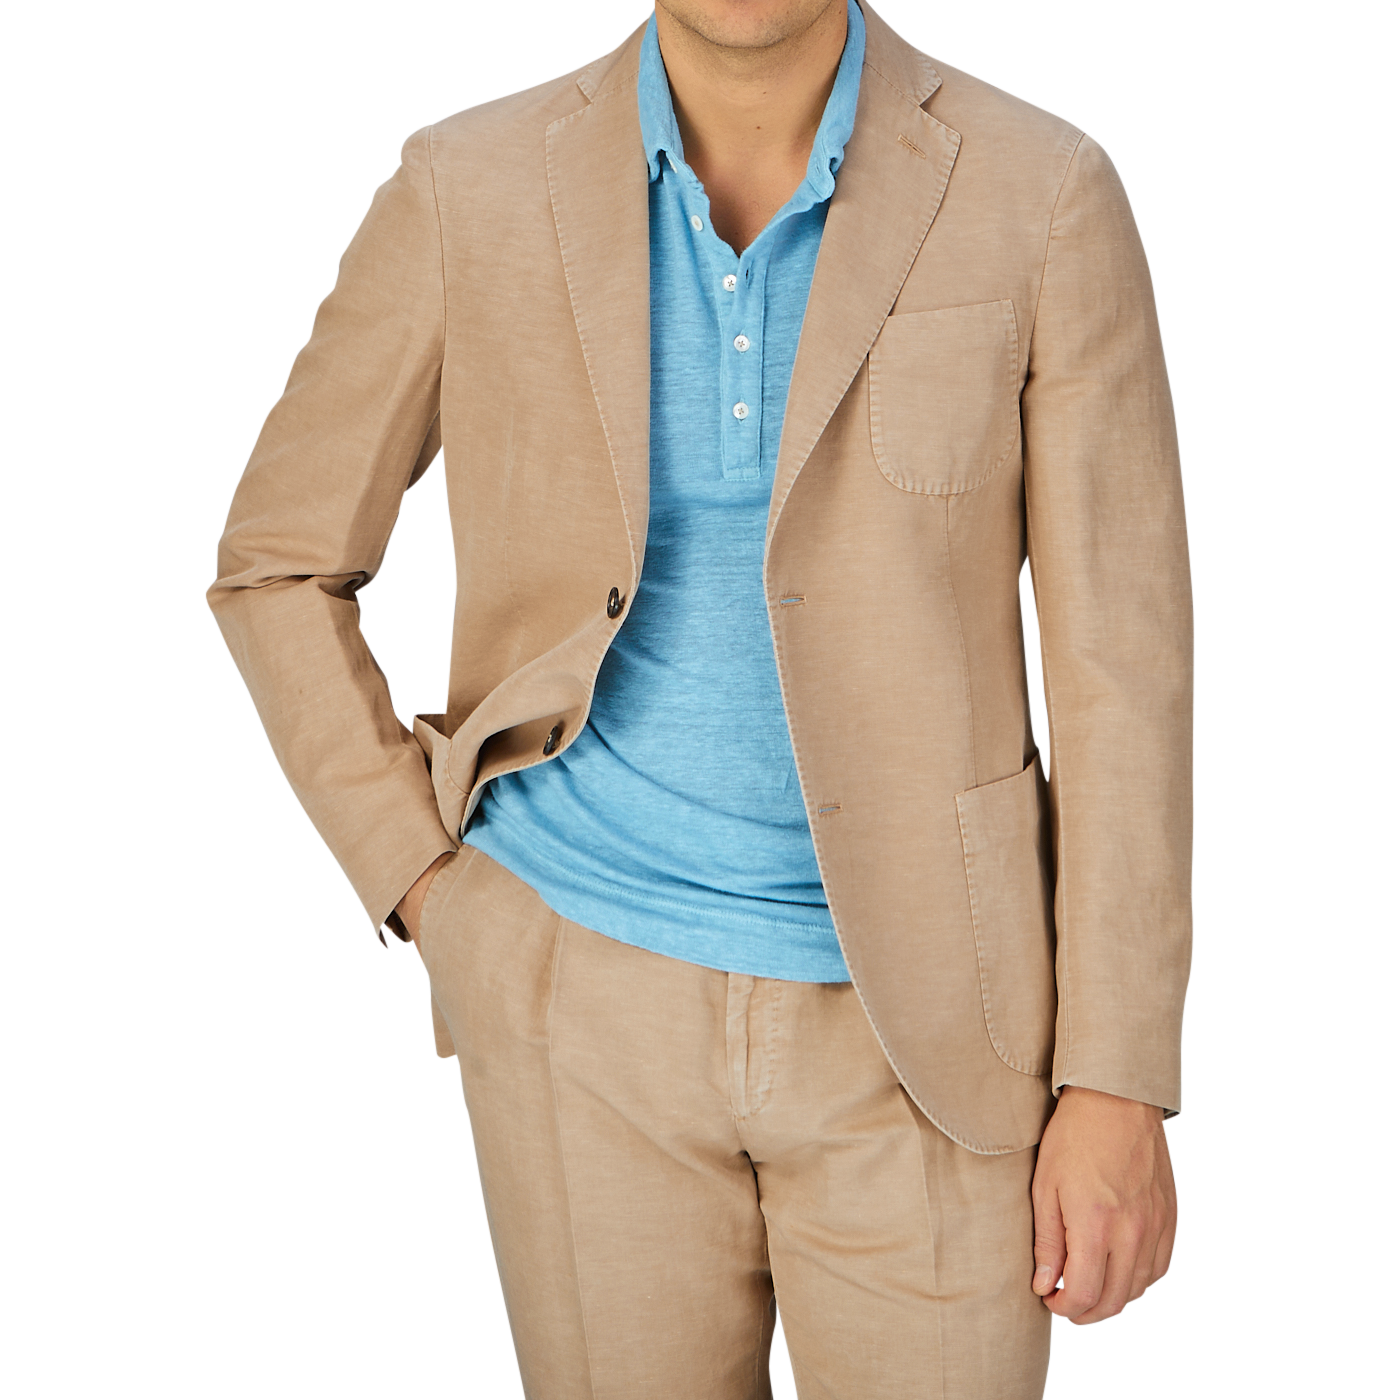 A person wearing a Slowear Light Beige Washed Chinolino Suit jacket over a light blue t-shirt, with matching medium-rise Slowear Light Beige Washed Chinolino Suit trousers.